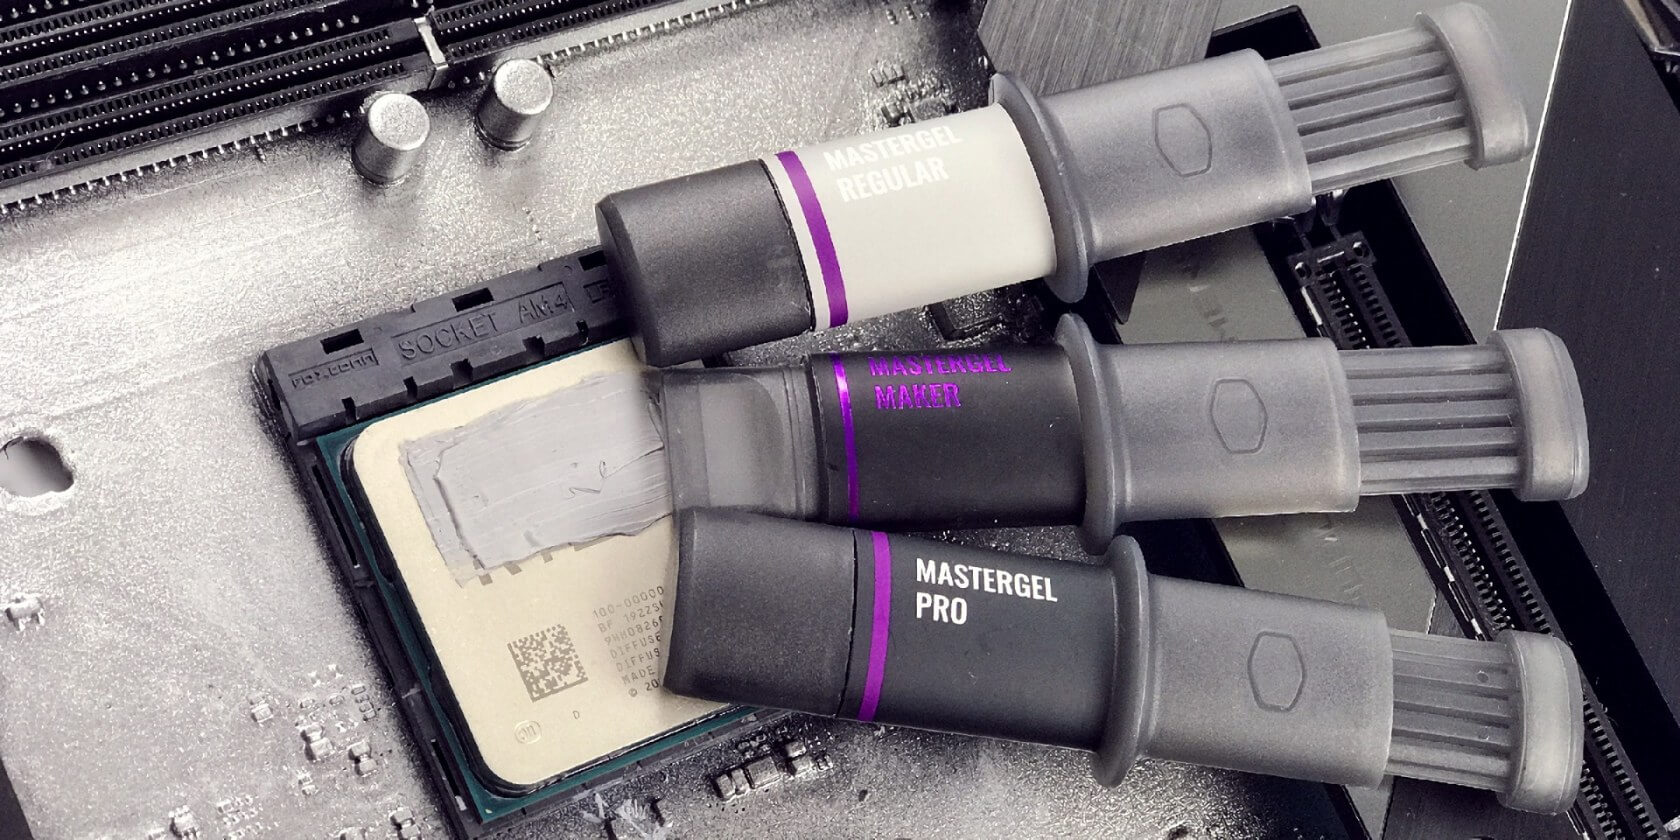 Cooler Master's thermal paste tubes were redesigned because parents thought their kids were on drugs